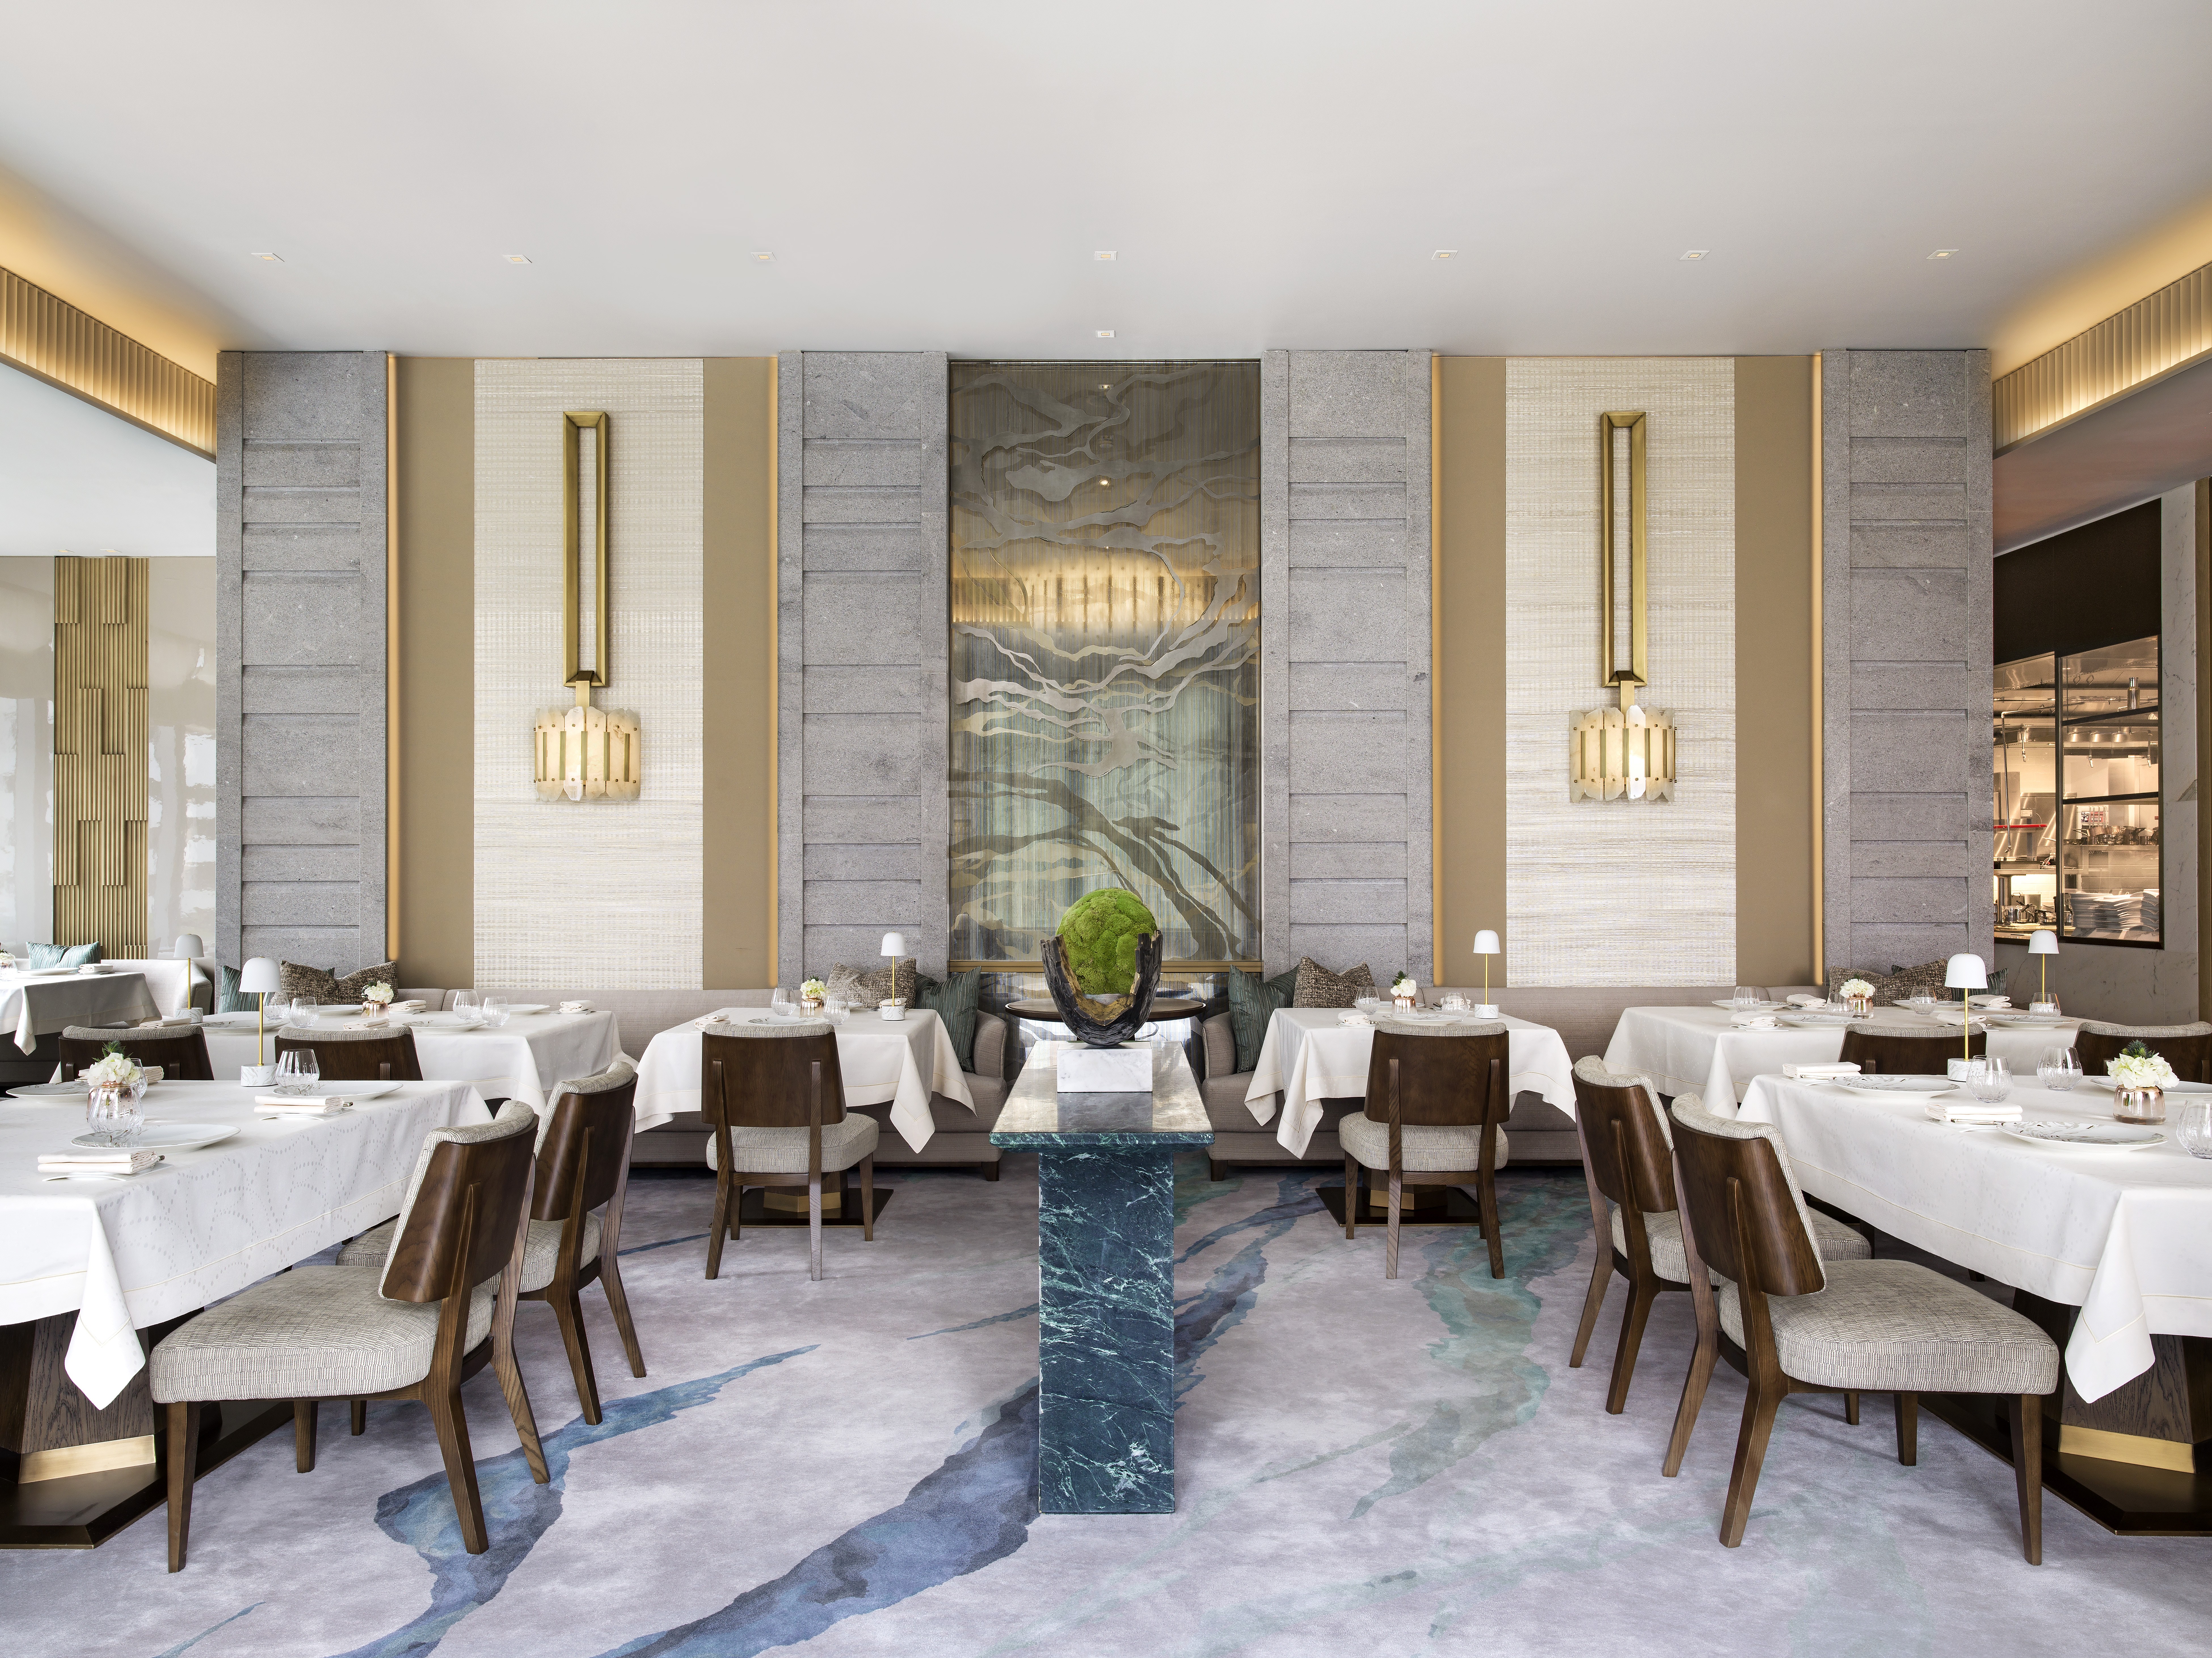 The 64-seat dining room is spread across two salons. Photos: handouts